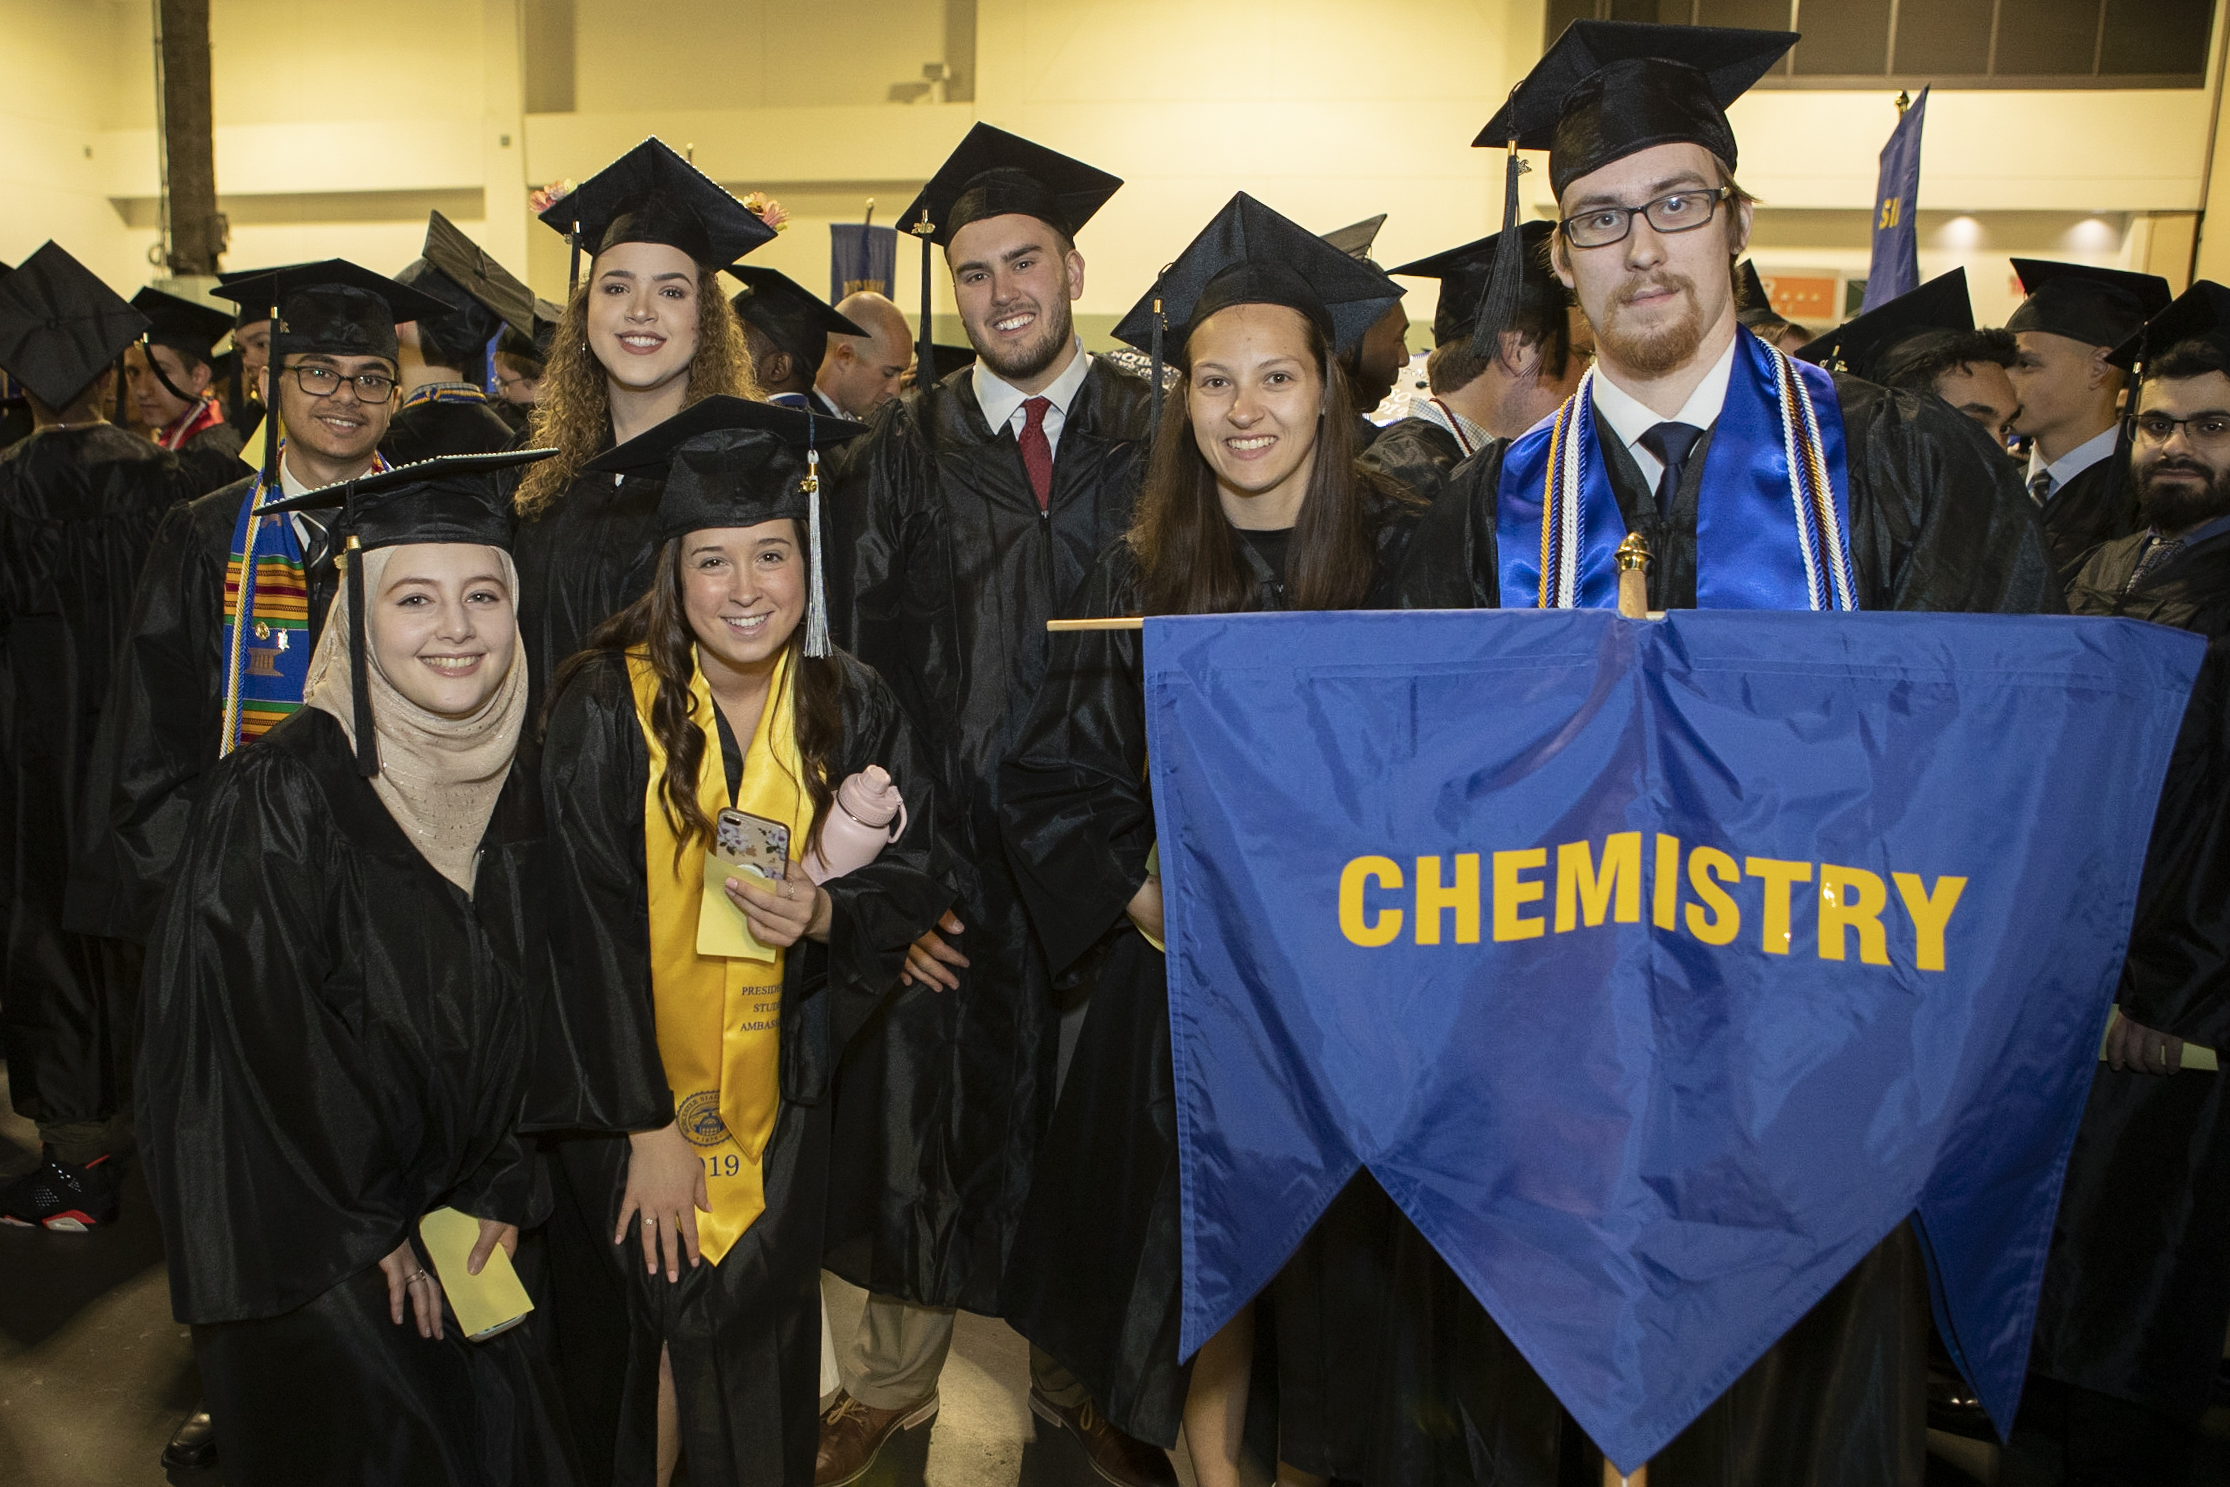 Chemistry honors students holding 'chemistry' flag during graduation